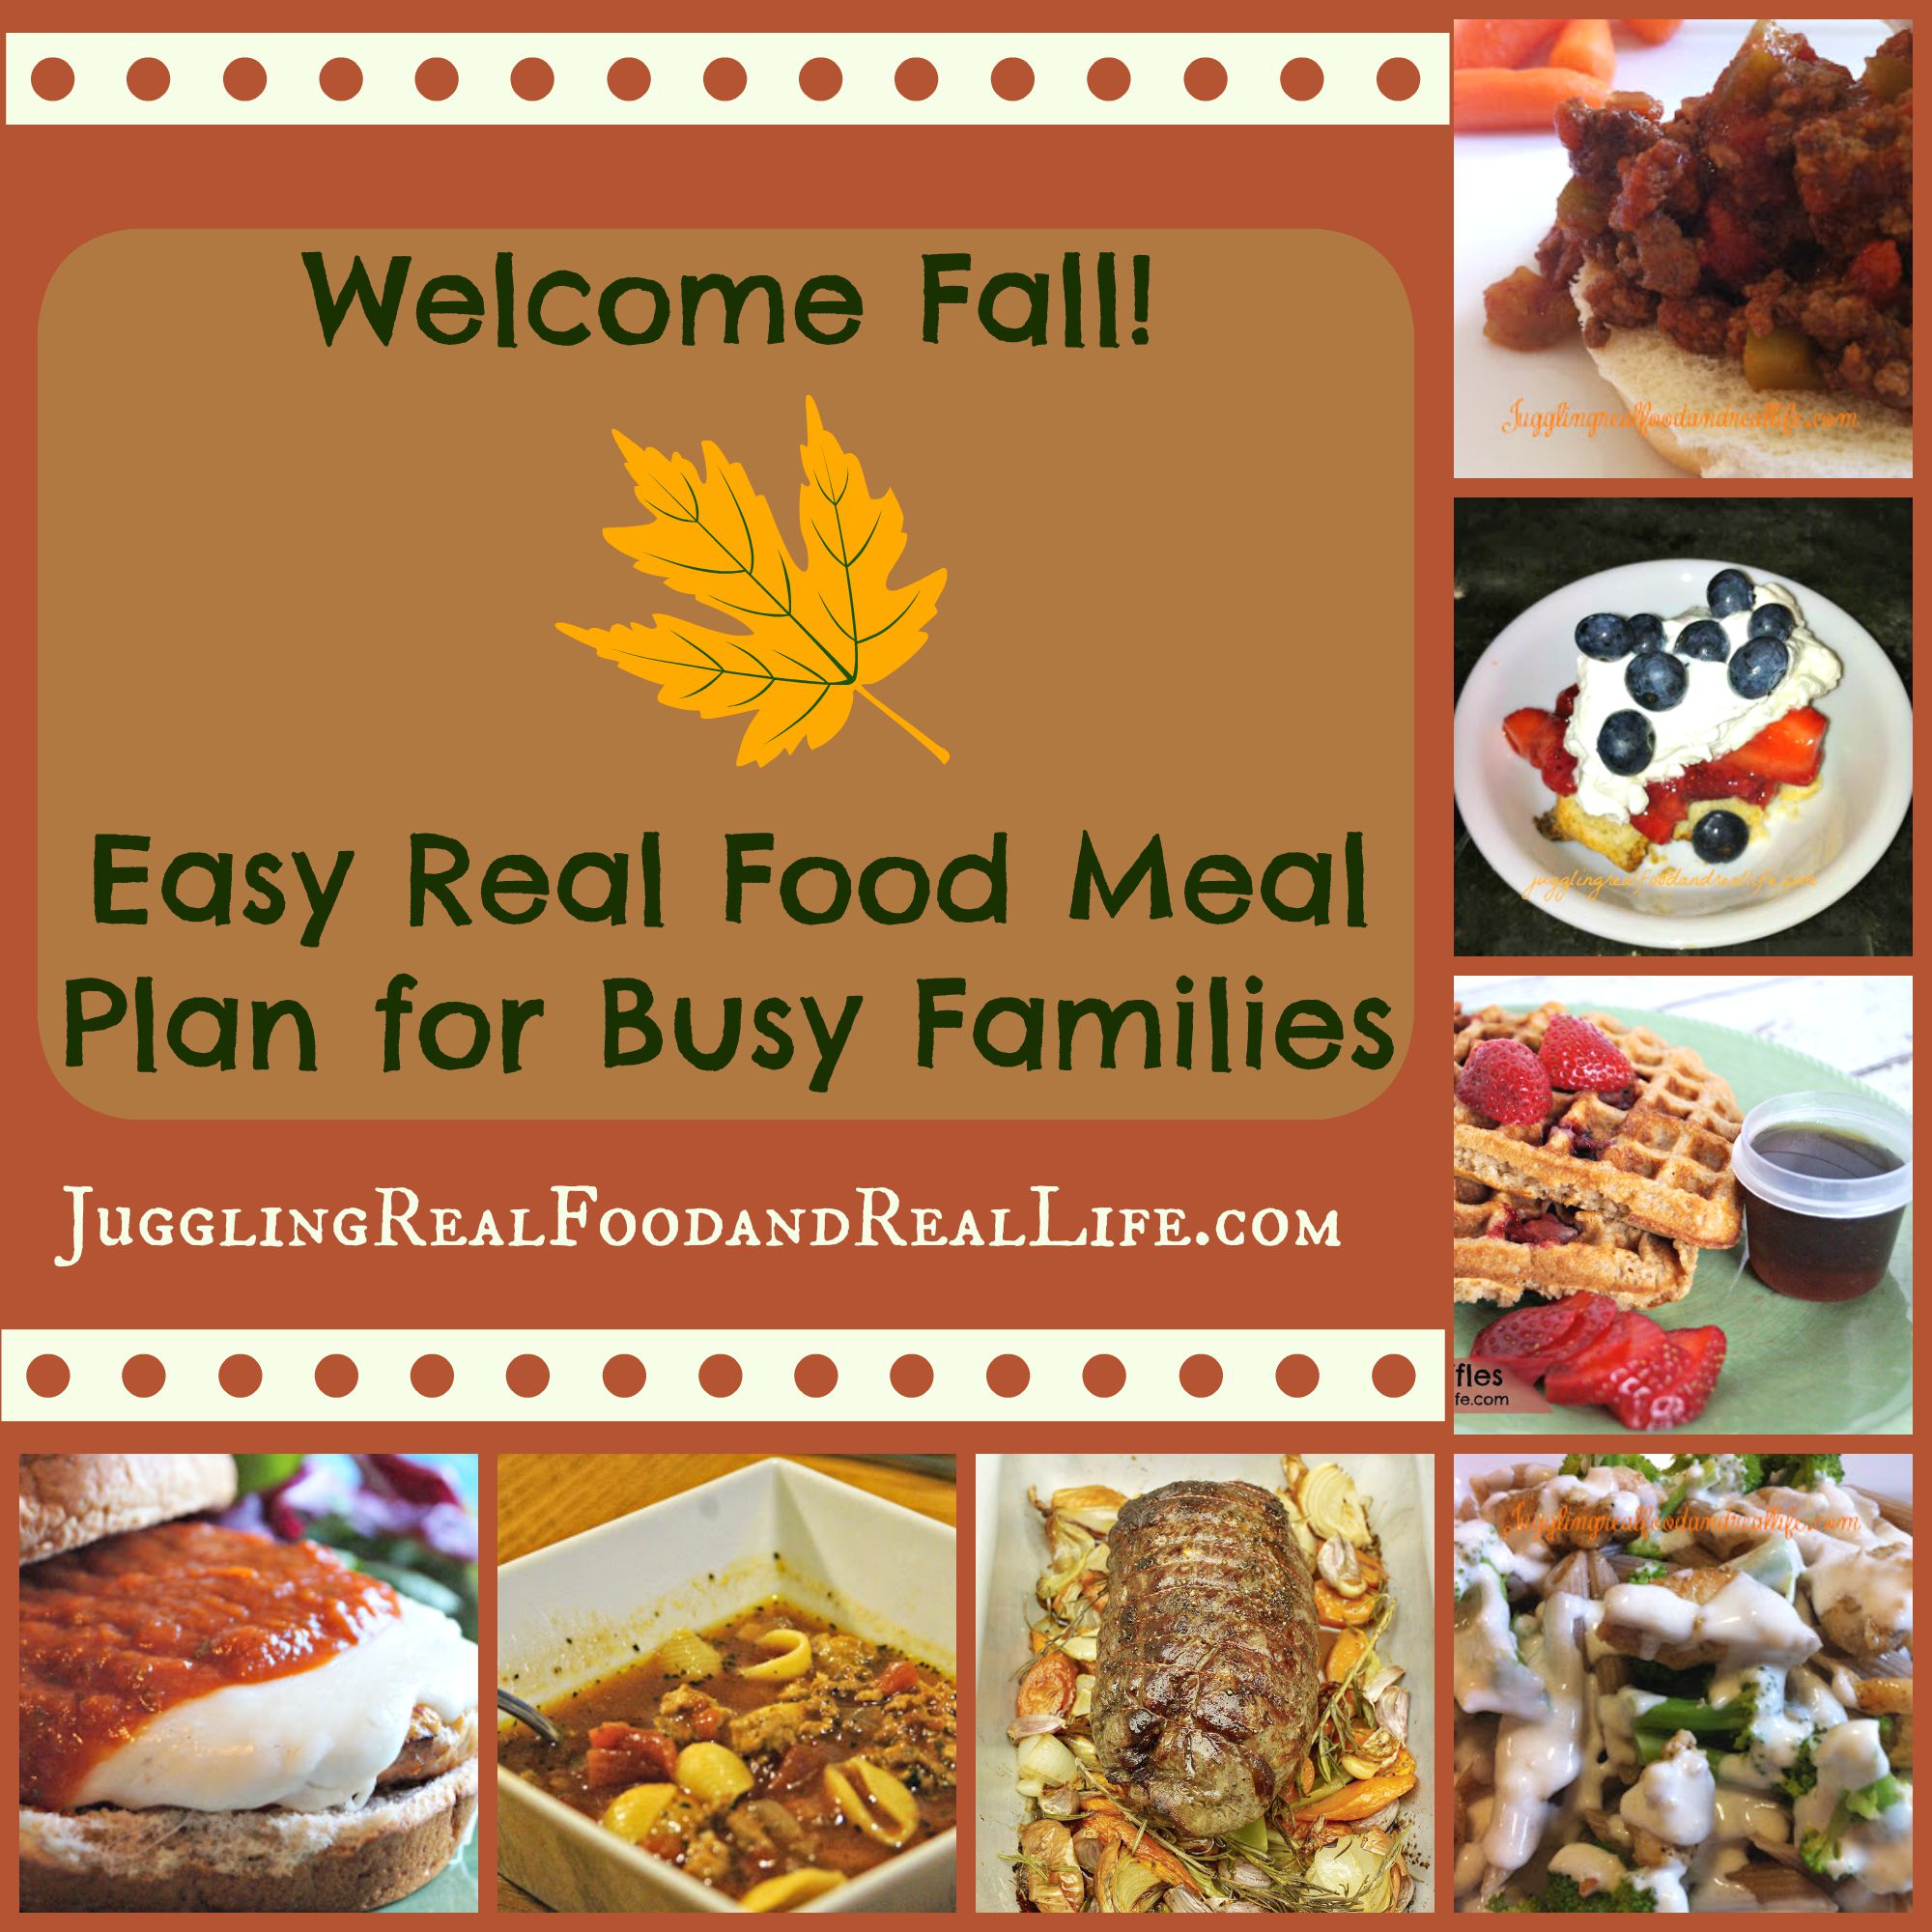 Real Food Meal Plan for Busy Families – Welcome Fall